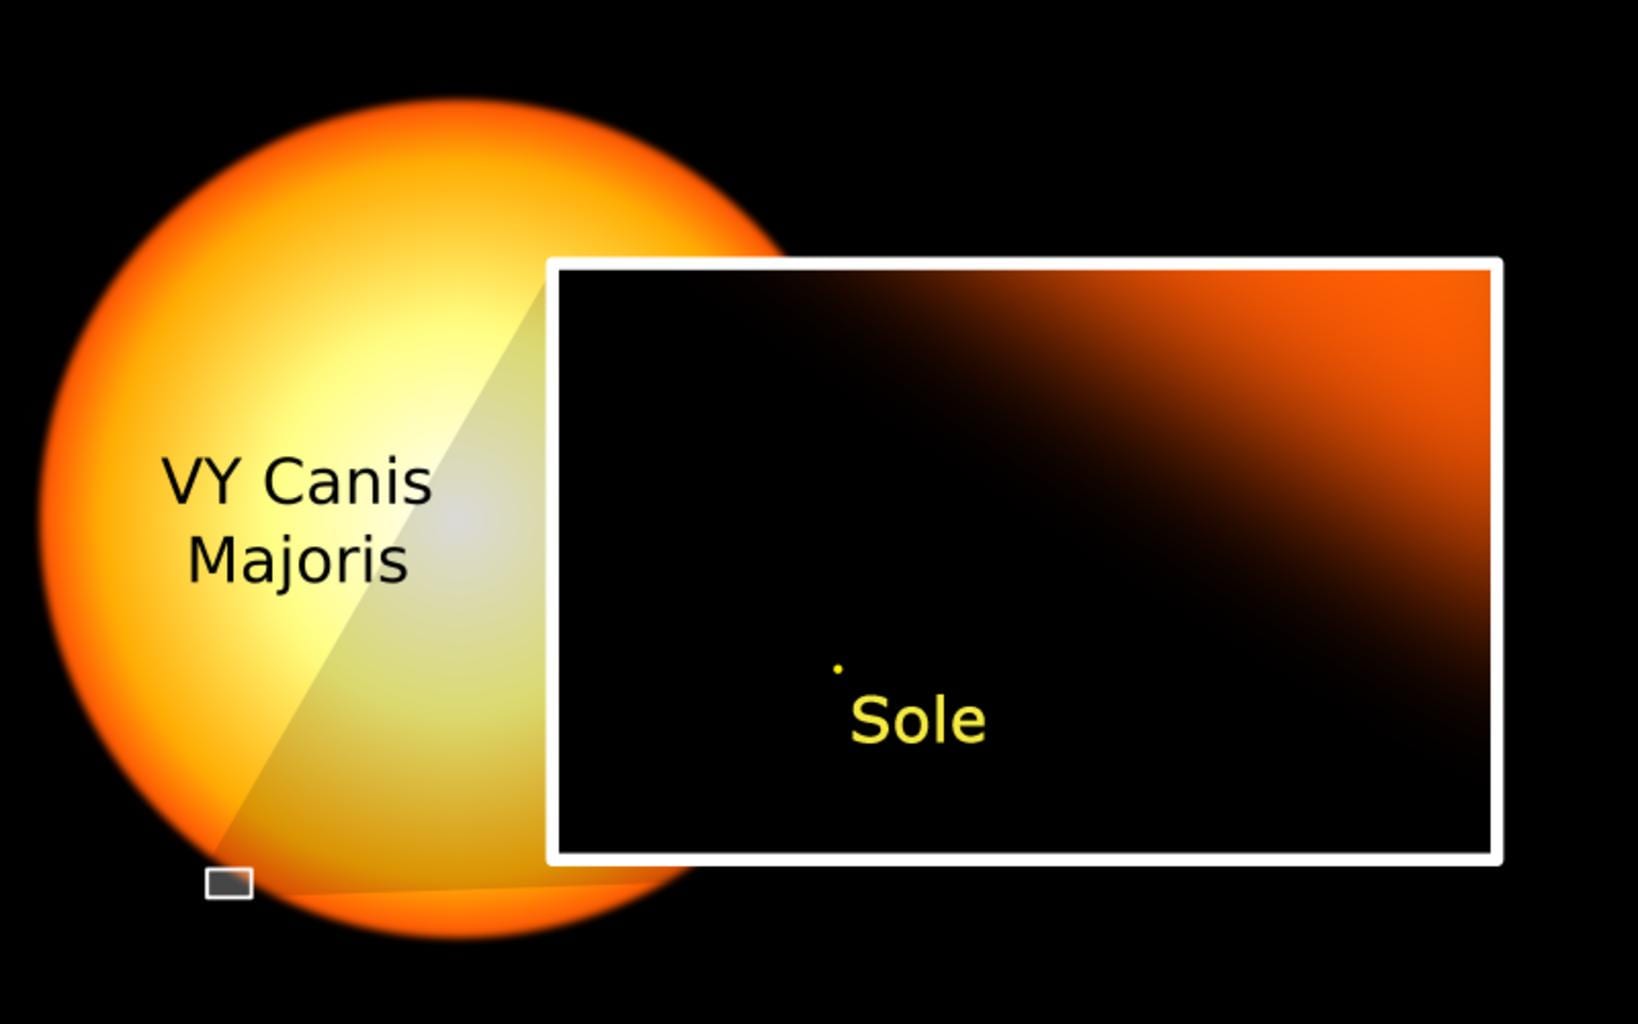 vy canis majoris facts